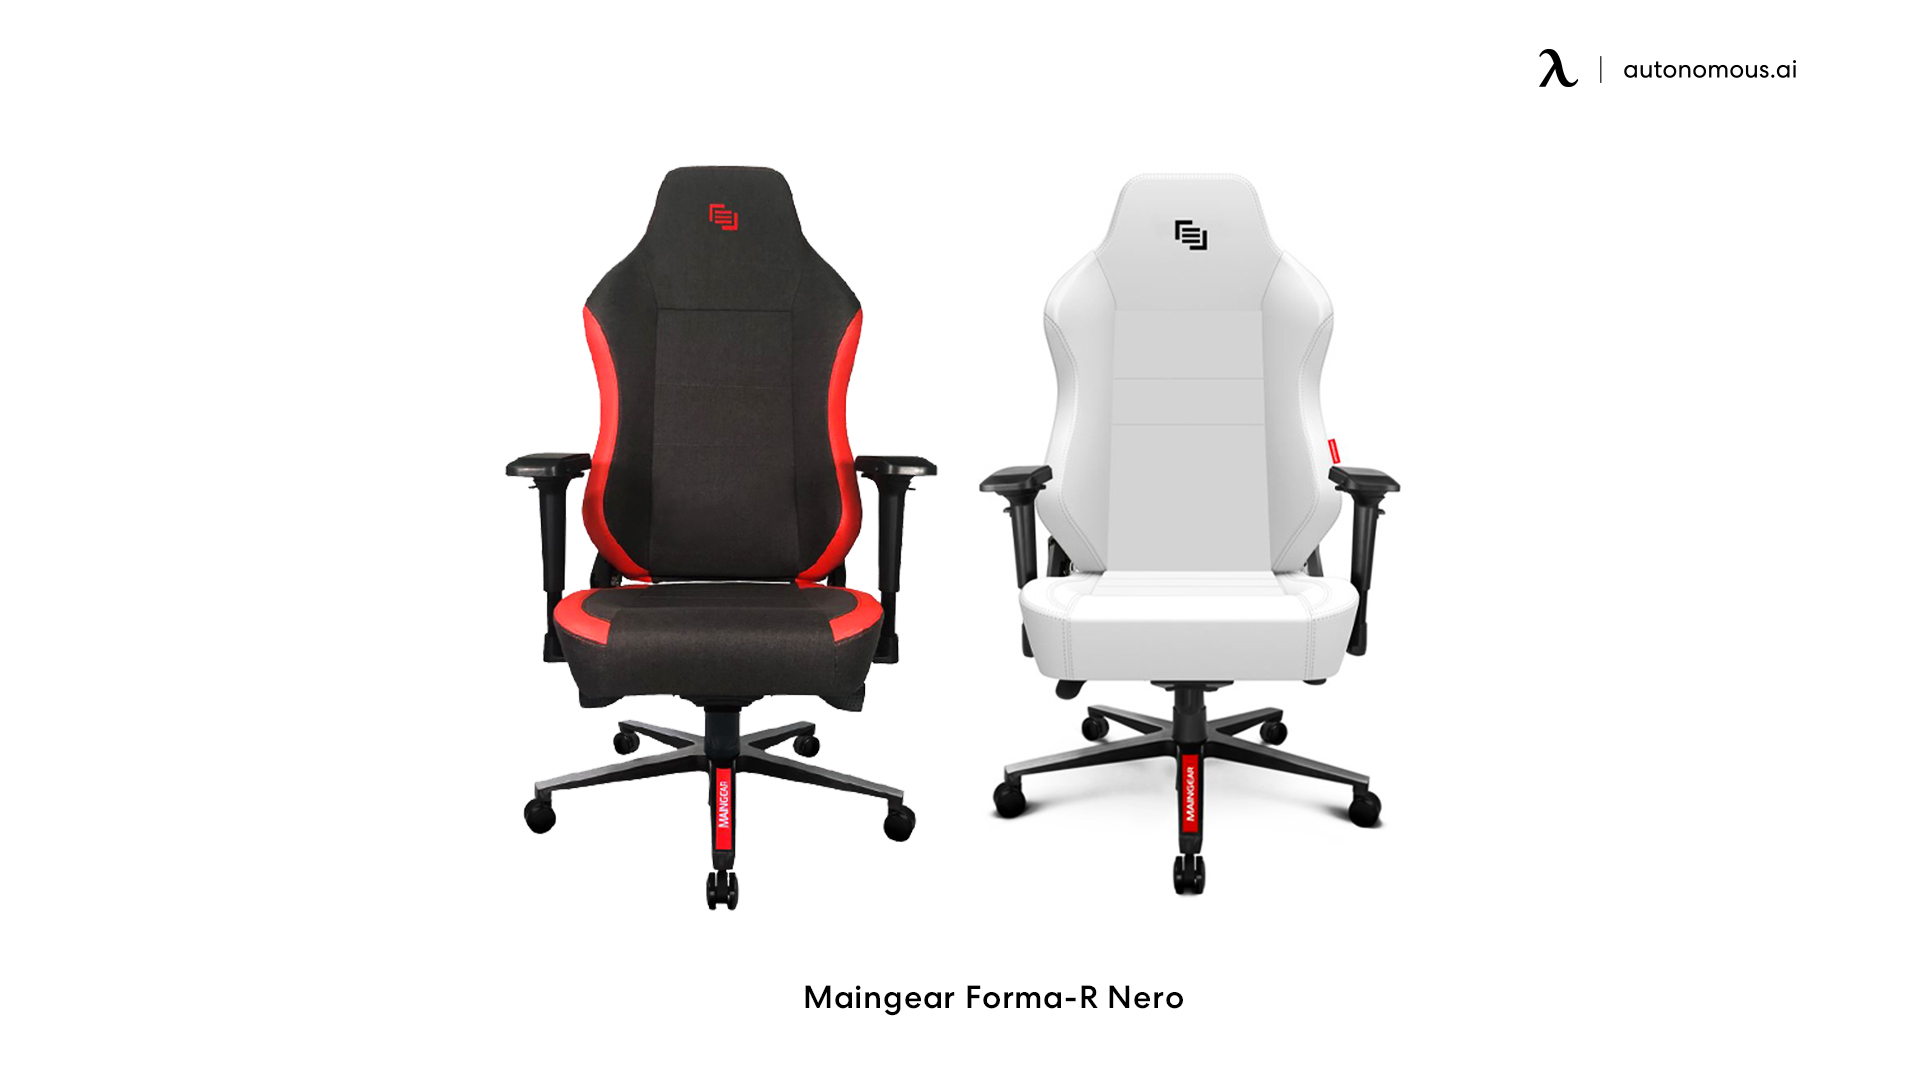 Maingear Forma-R Nero leather gaming chair